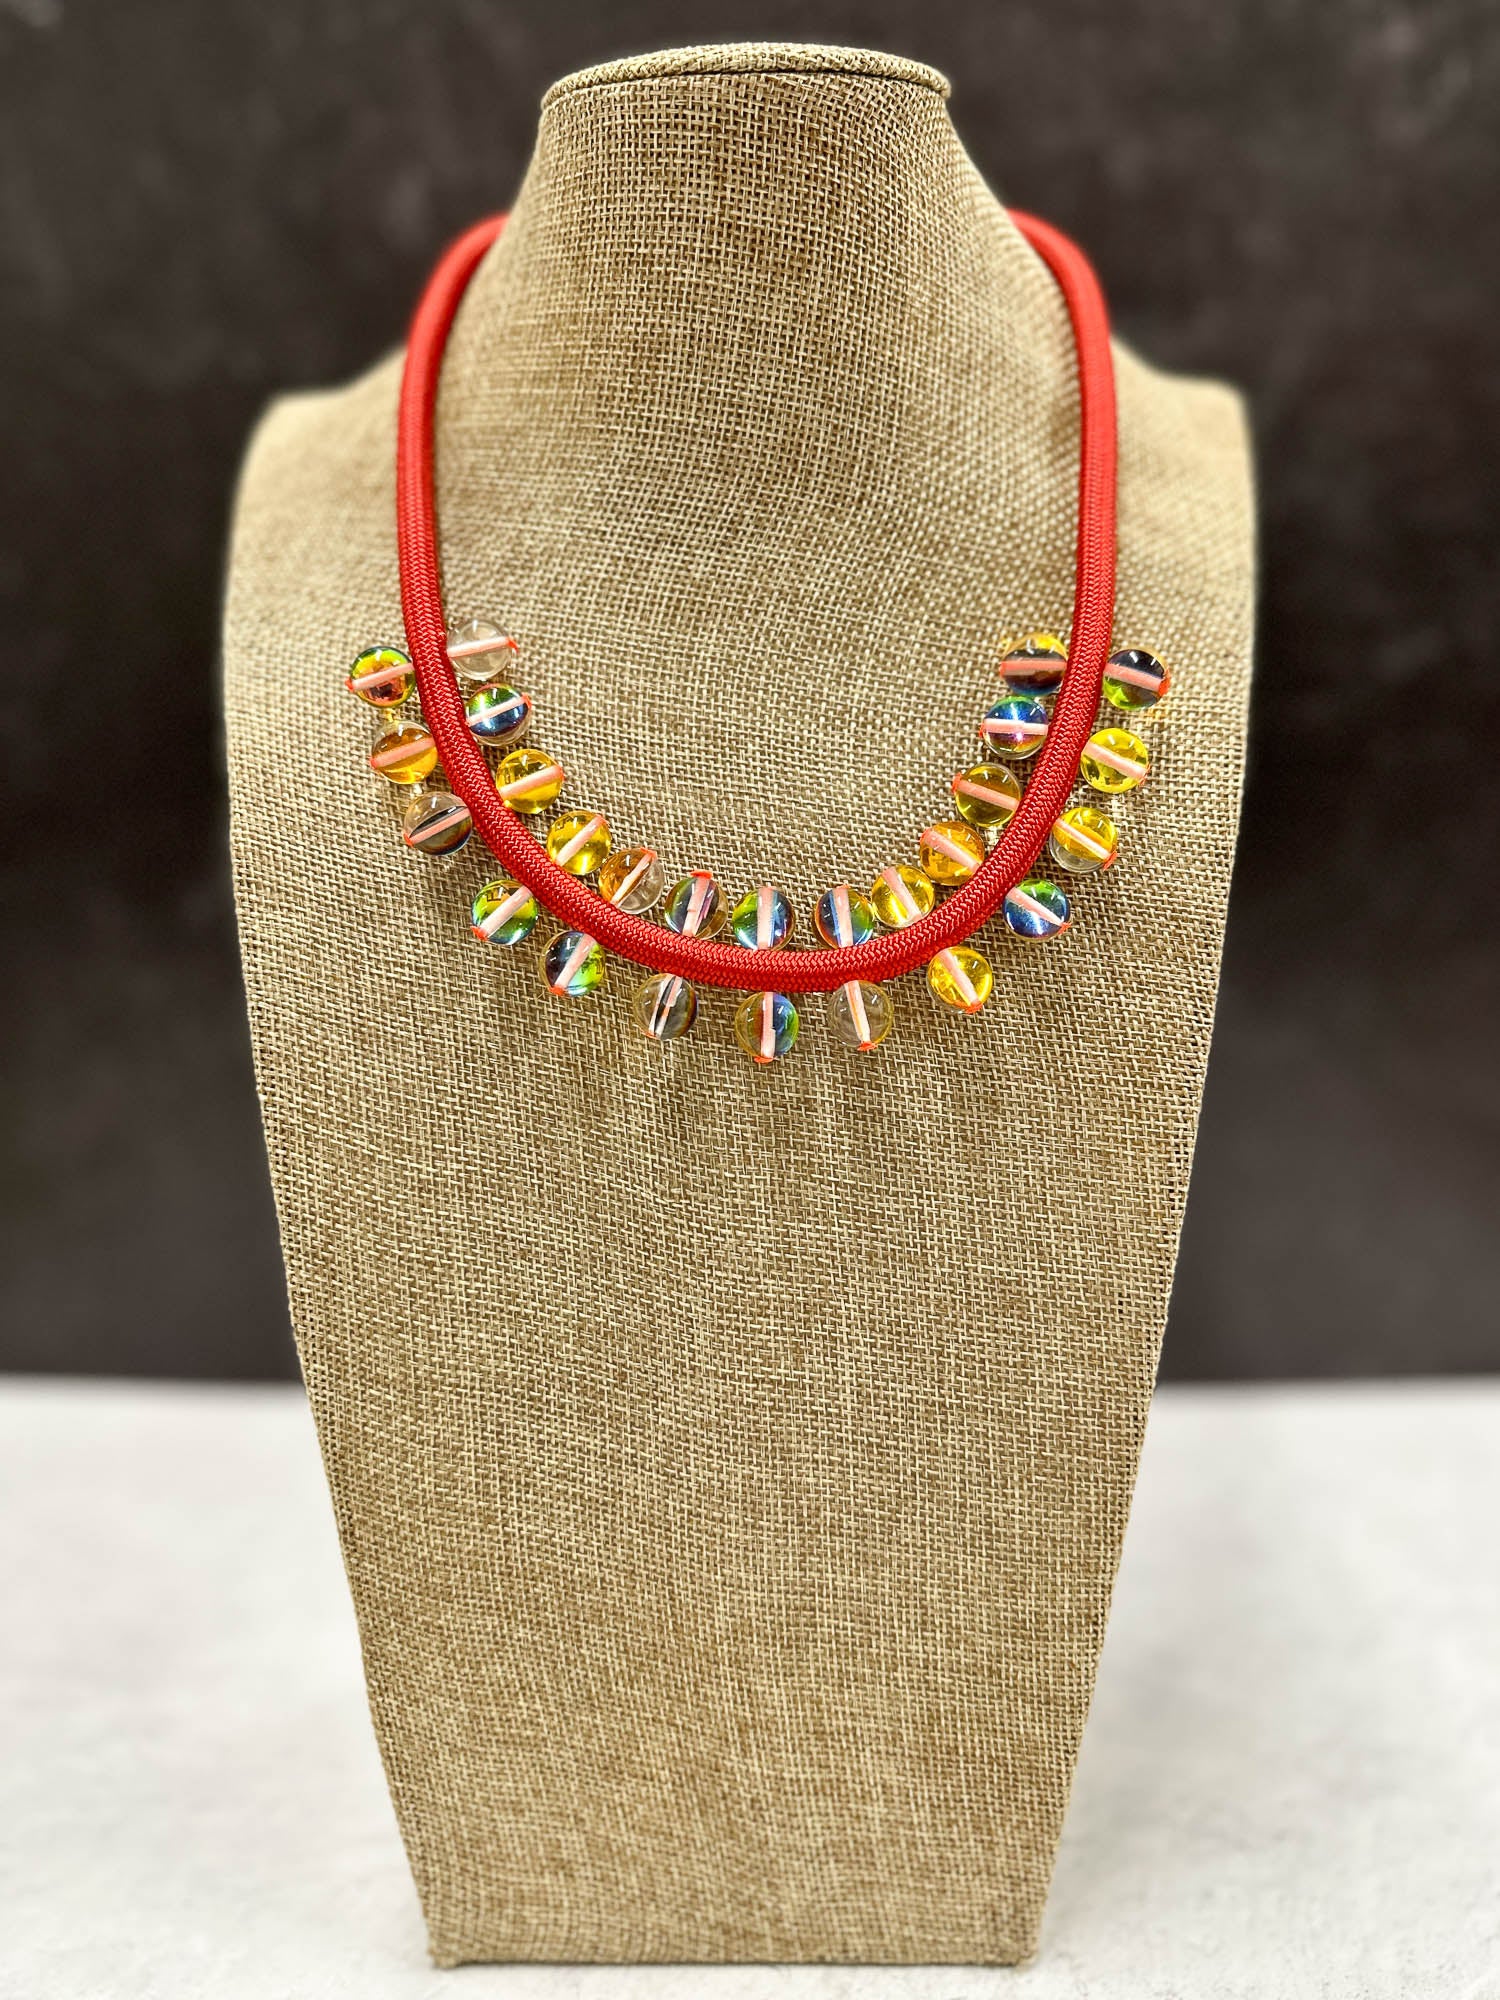 Christina Brampti Glass Beads on Cord Necklace, Red - Statement Boutique